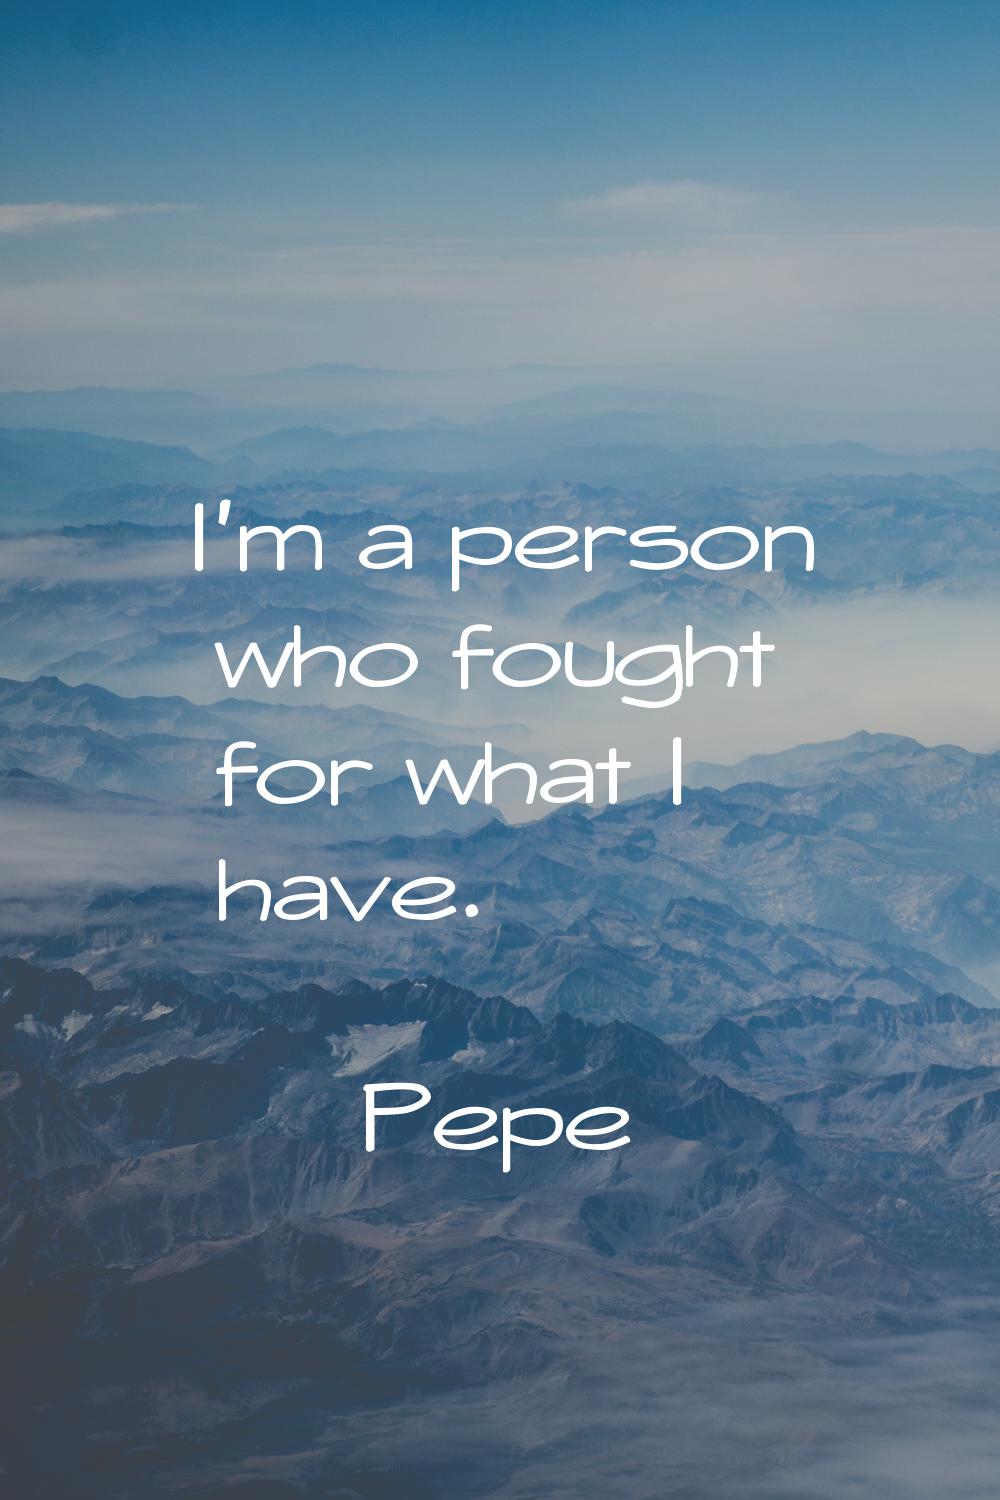 I'm a person who fought for what I have.